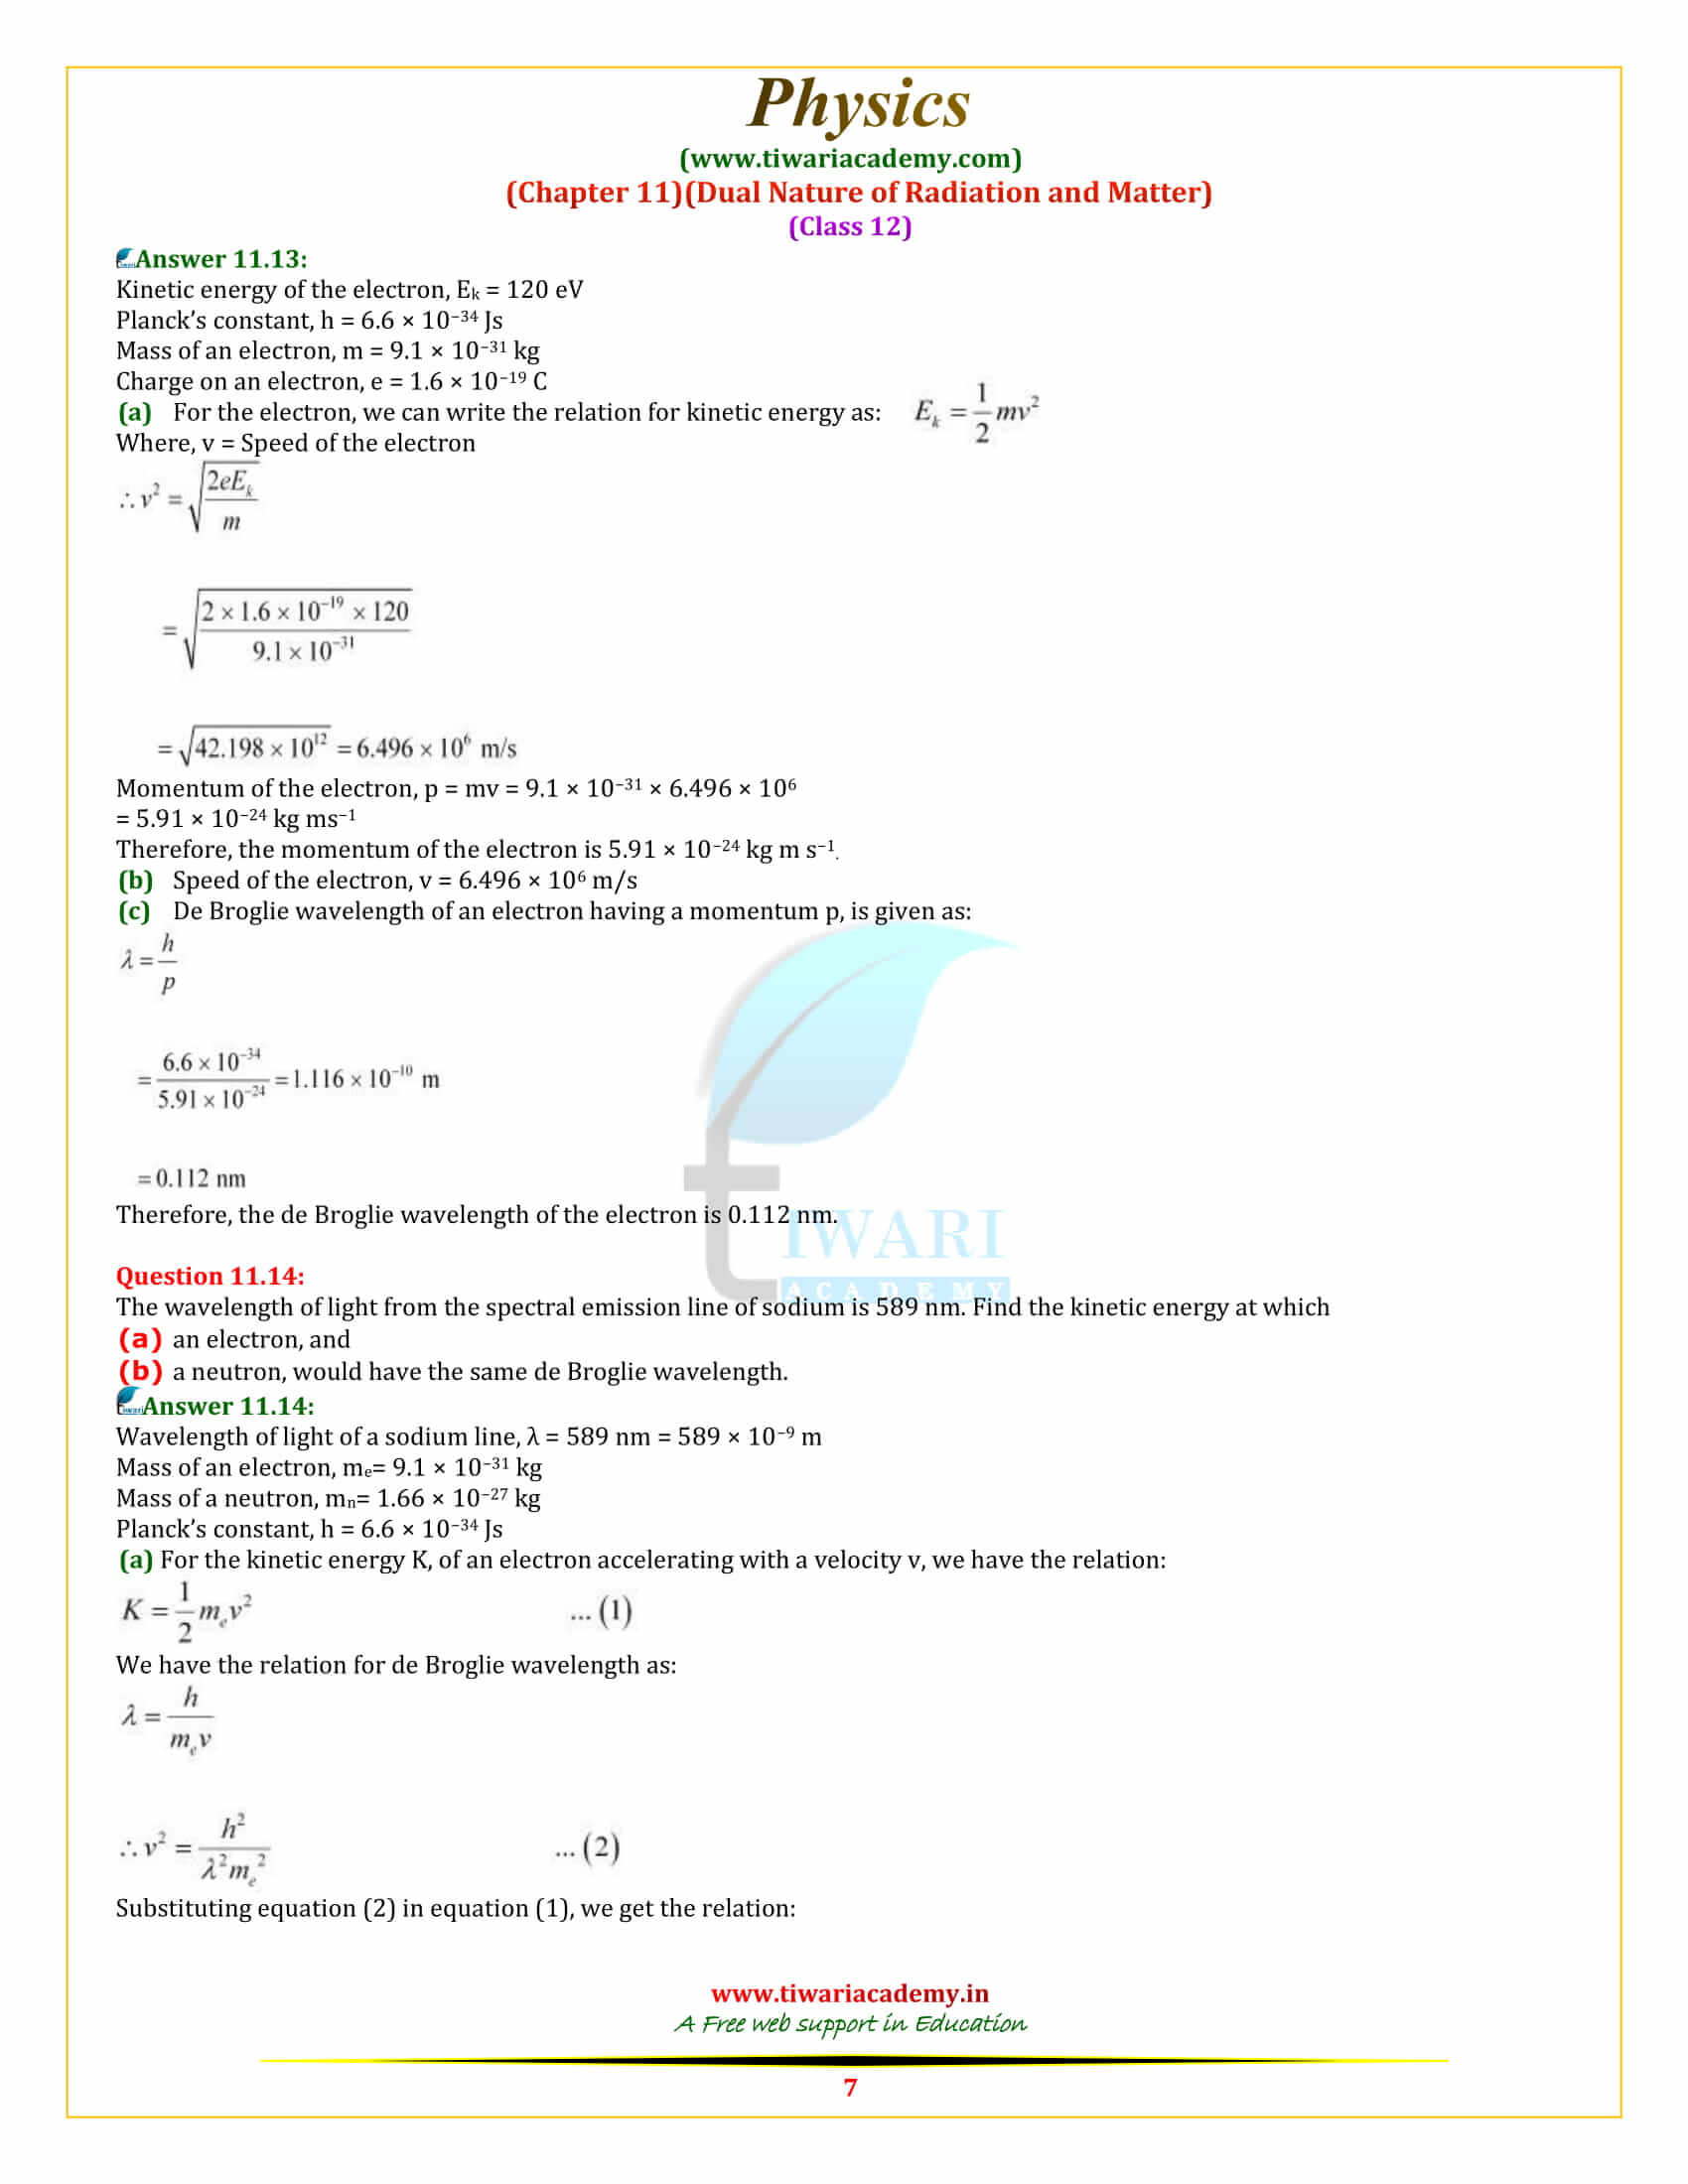 NCERT Solutions for Class 12 Physics Chapter 11 Dual Nature in english medium